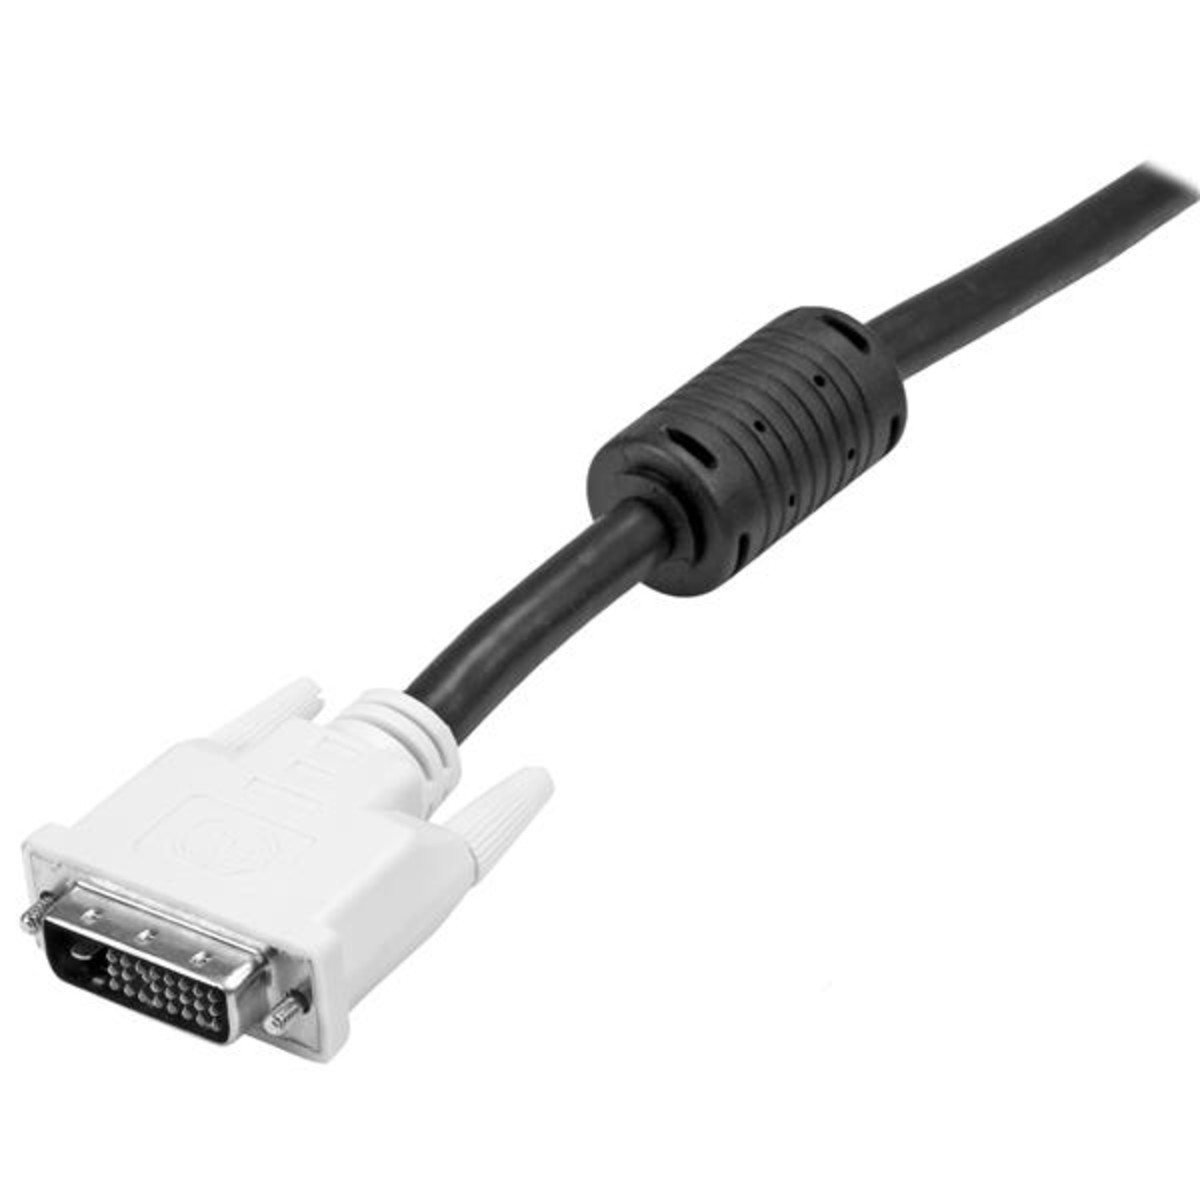 5m DVI-D DL Digital Video Monitor Cable